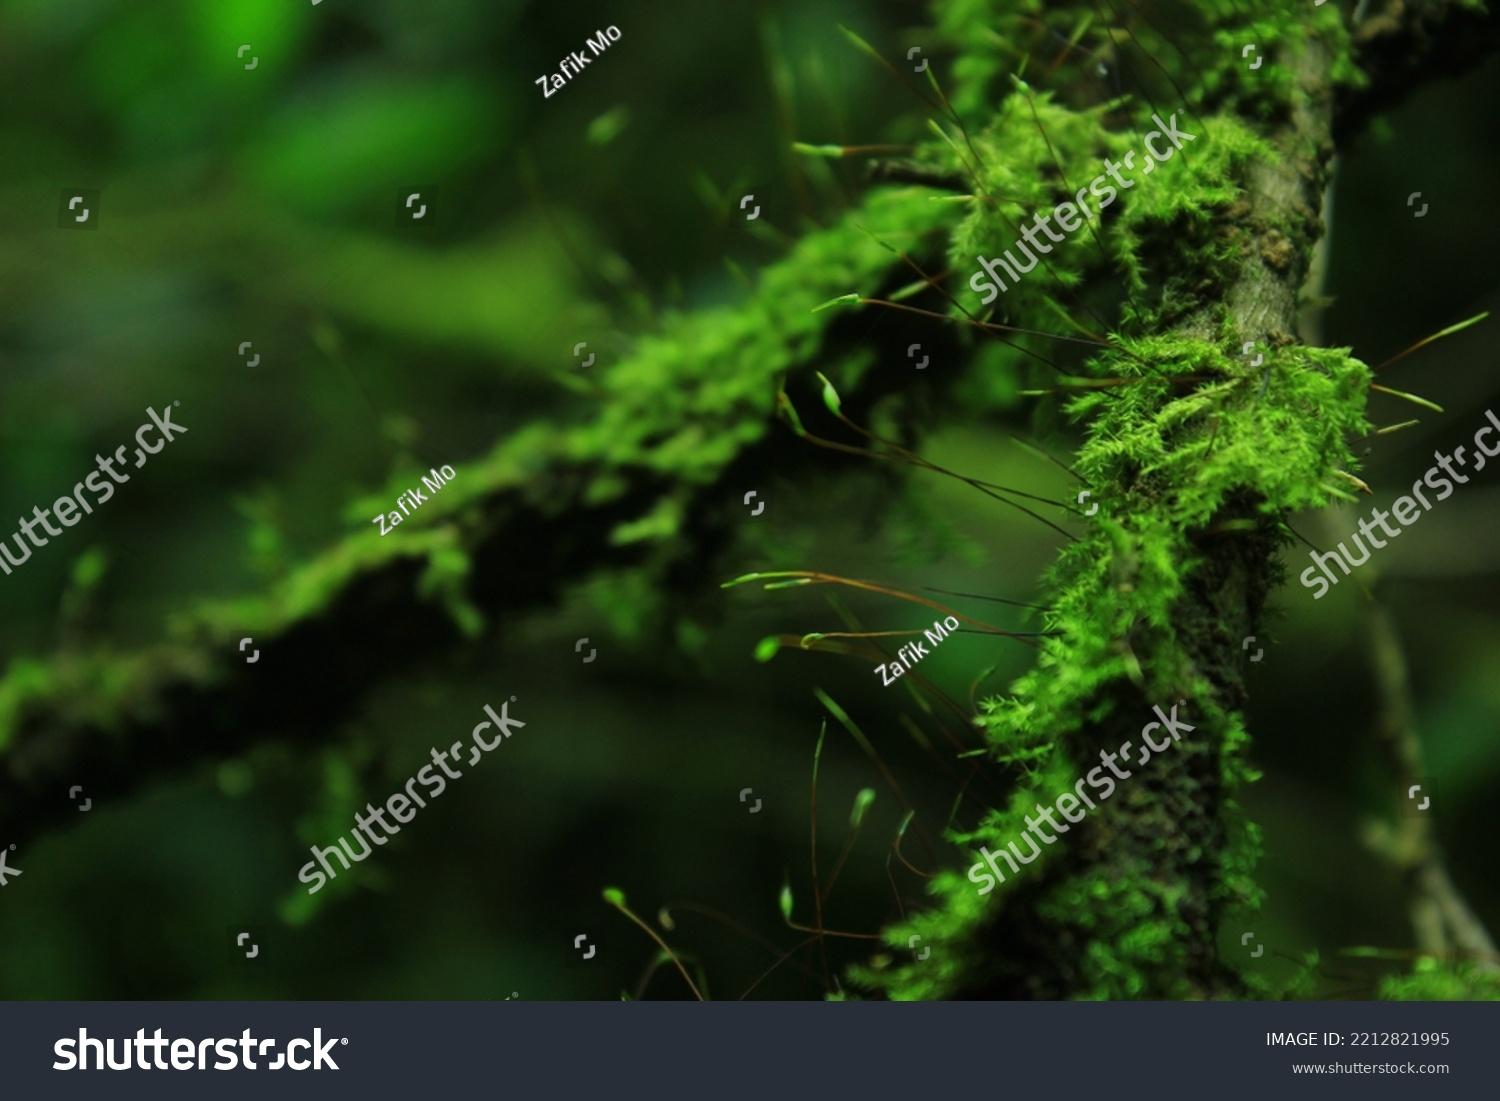 stock-photo-taxithelium-mountain-forest-moss-background-2212821995.jpg